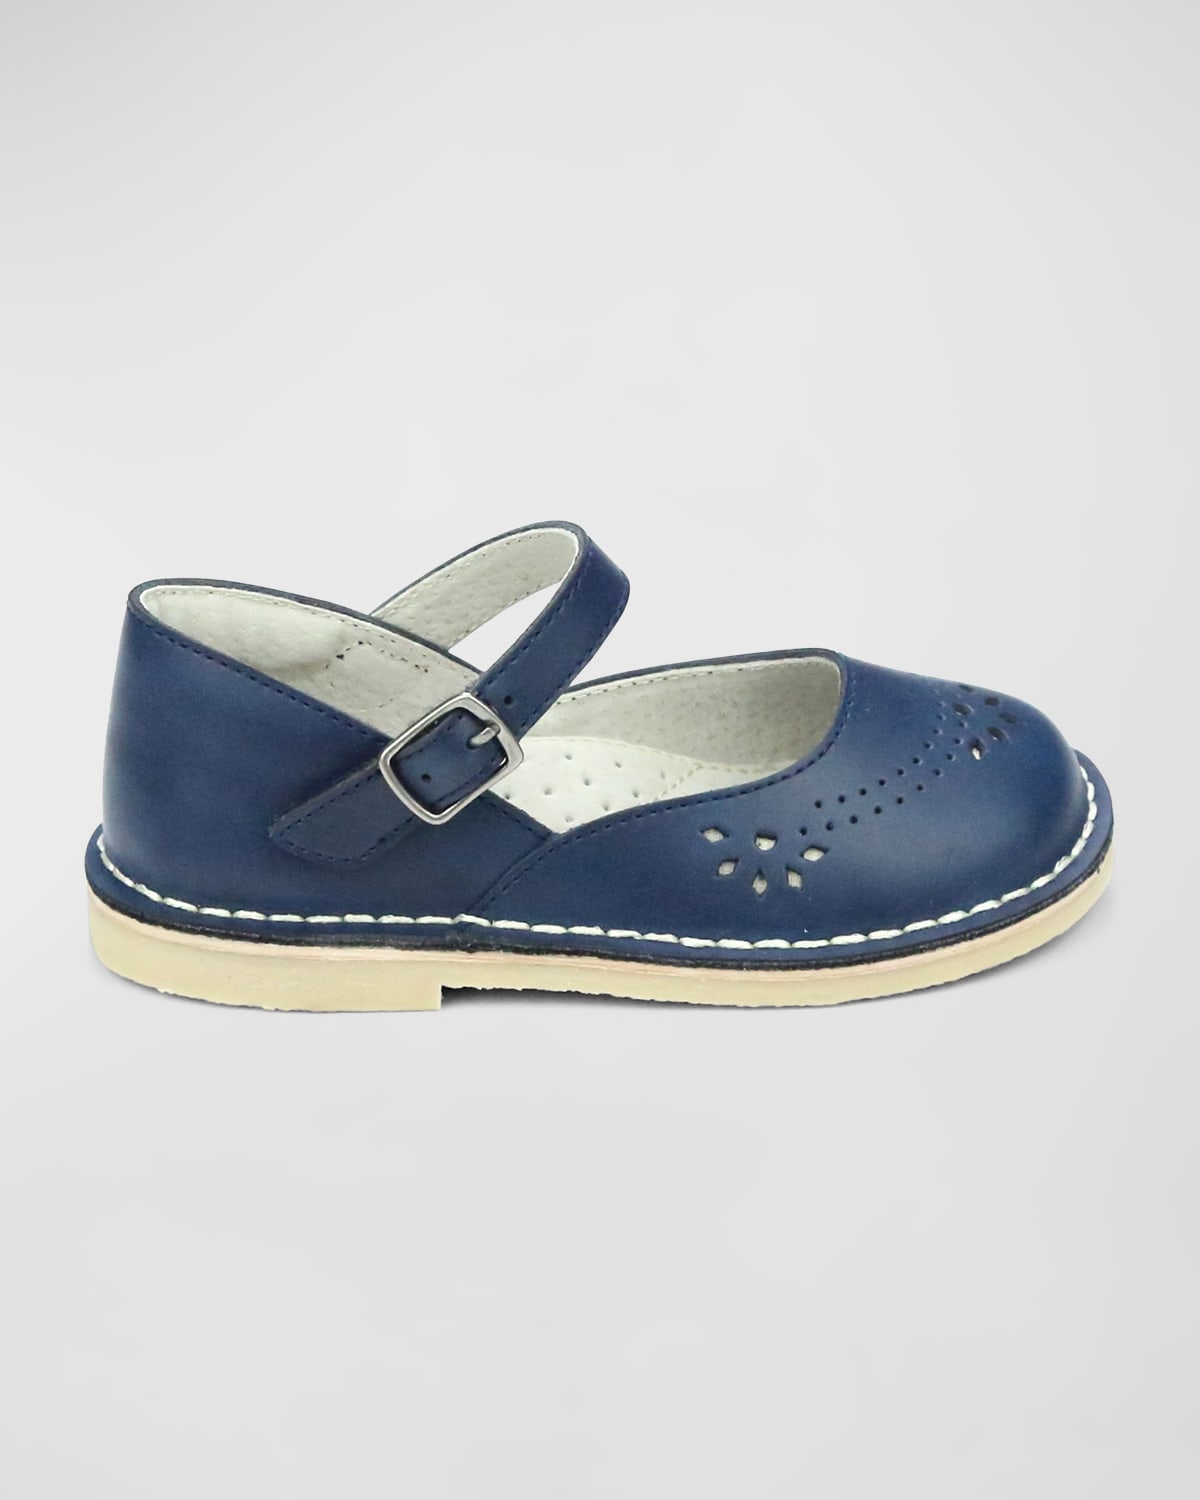 L'amour Shoes Girl's Antonia Grip-strap Mary Jane Shoes, Baby/toddler/kids In Navy